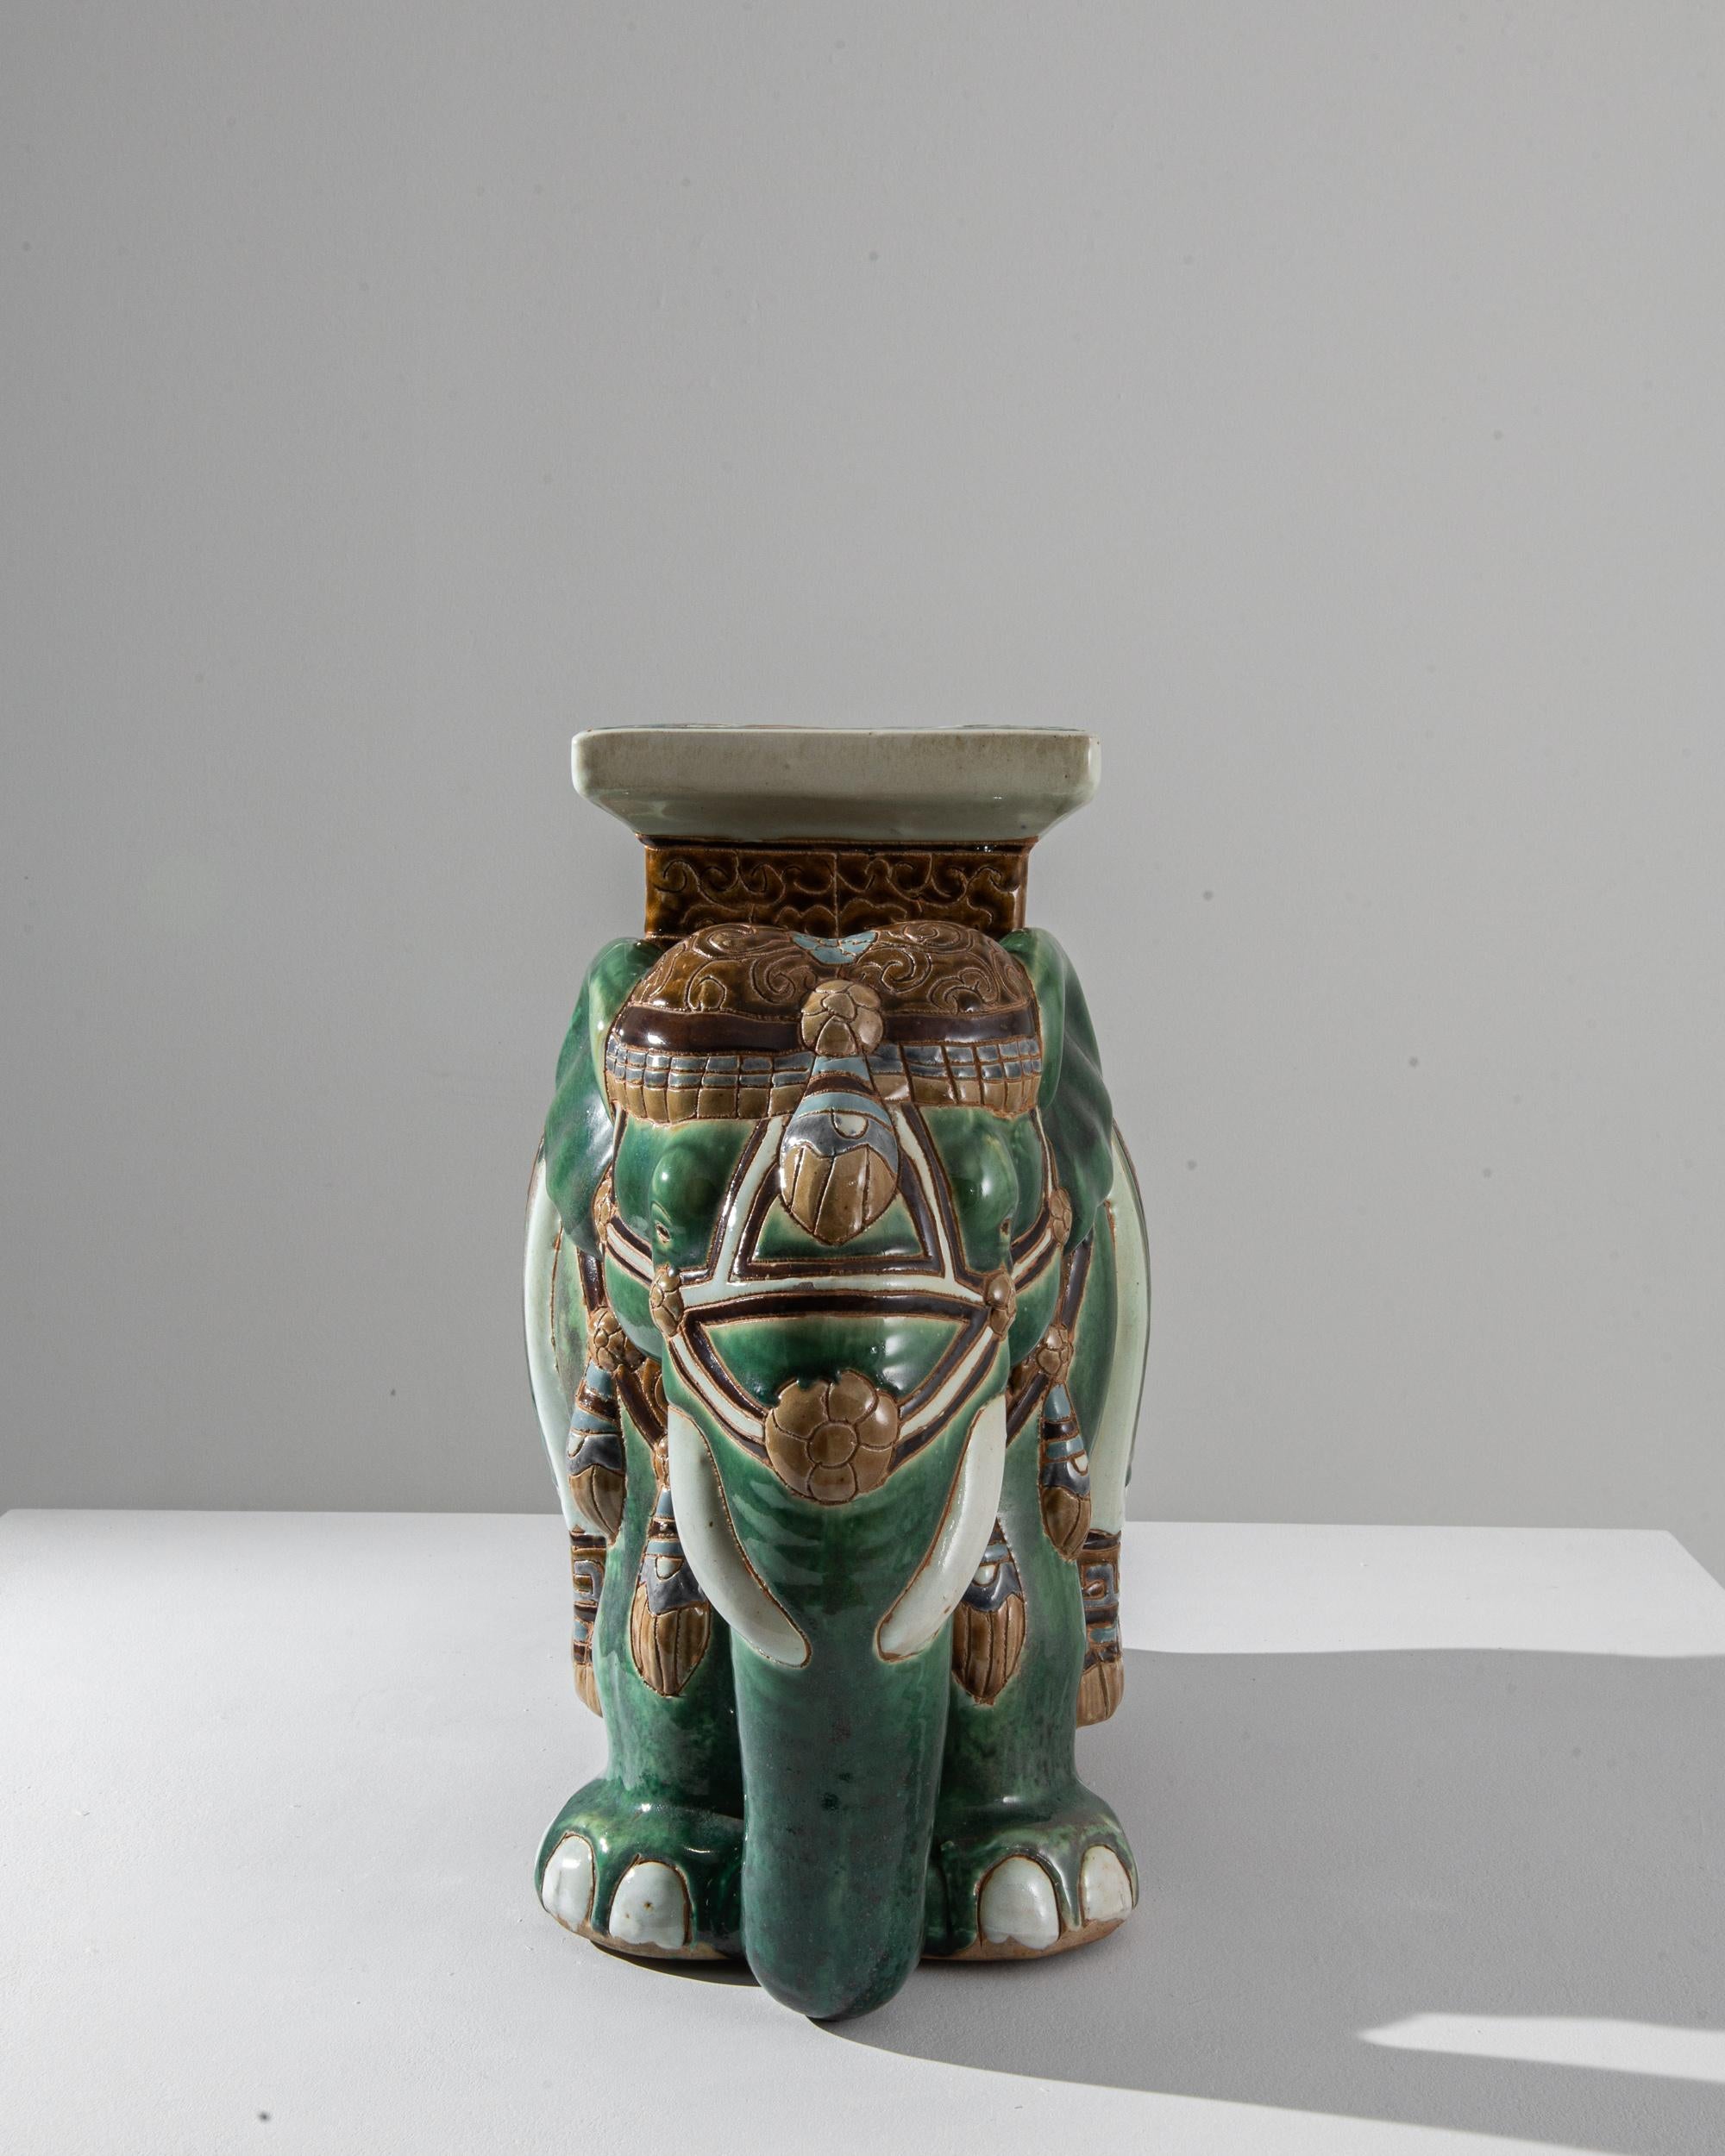 A ceramic decoration from 1960s France in the shape of an elephant. Glazed in a celadon hue laced with powder blue and yellow ochre; the saddle, seat and blanket are delicately patterned — reflecting Chinese and Arabic influences — suggesting the